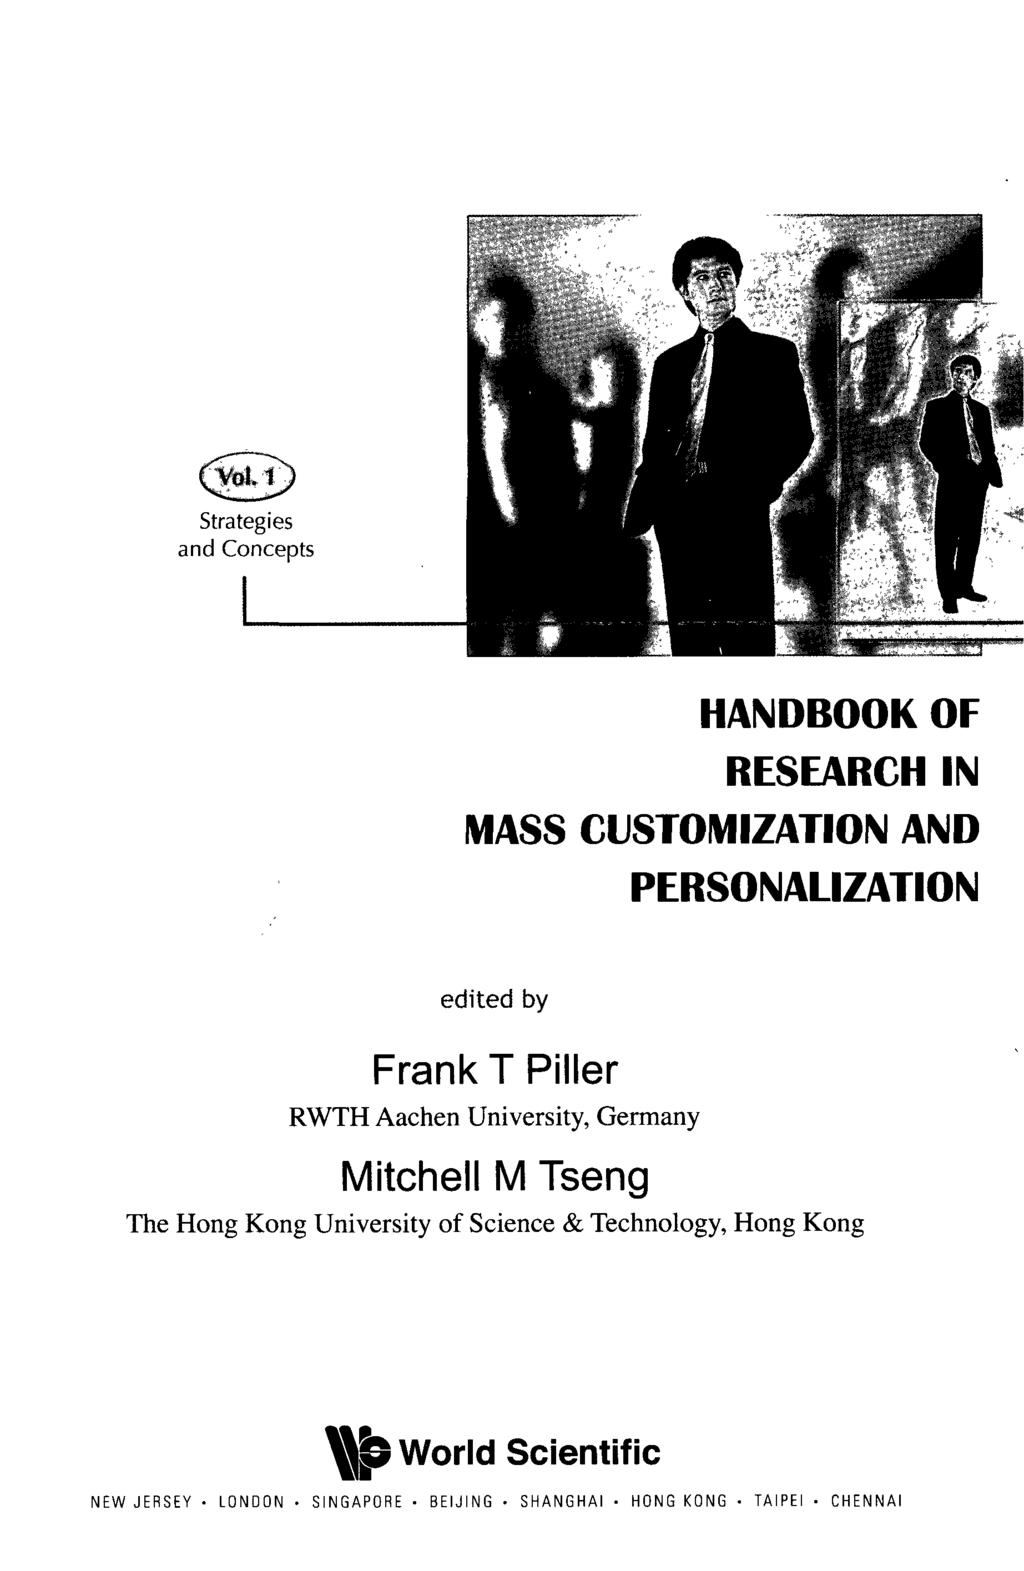 Strategies and Concepts HANDBOOK OF RESEARCH IN MASS CUSTOMIZATION AND PERSONALIZATION edited by Frank TPiller RWTH Aachen University, Germany Mitchell